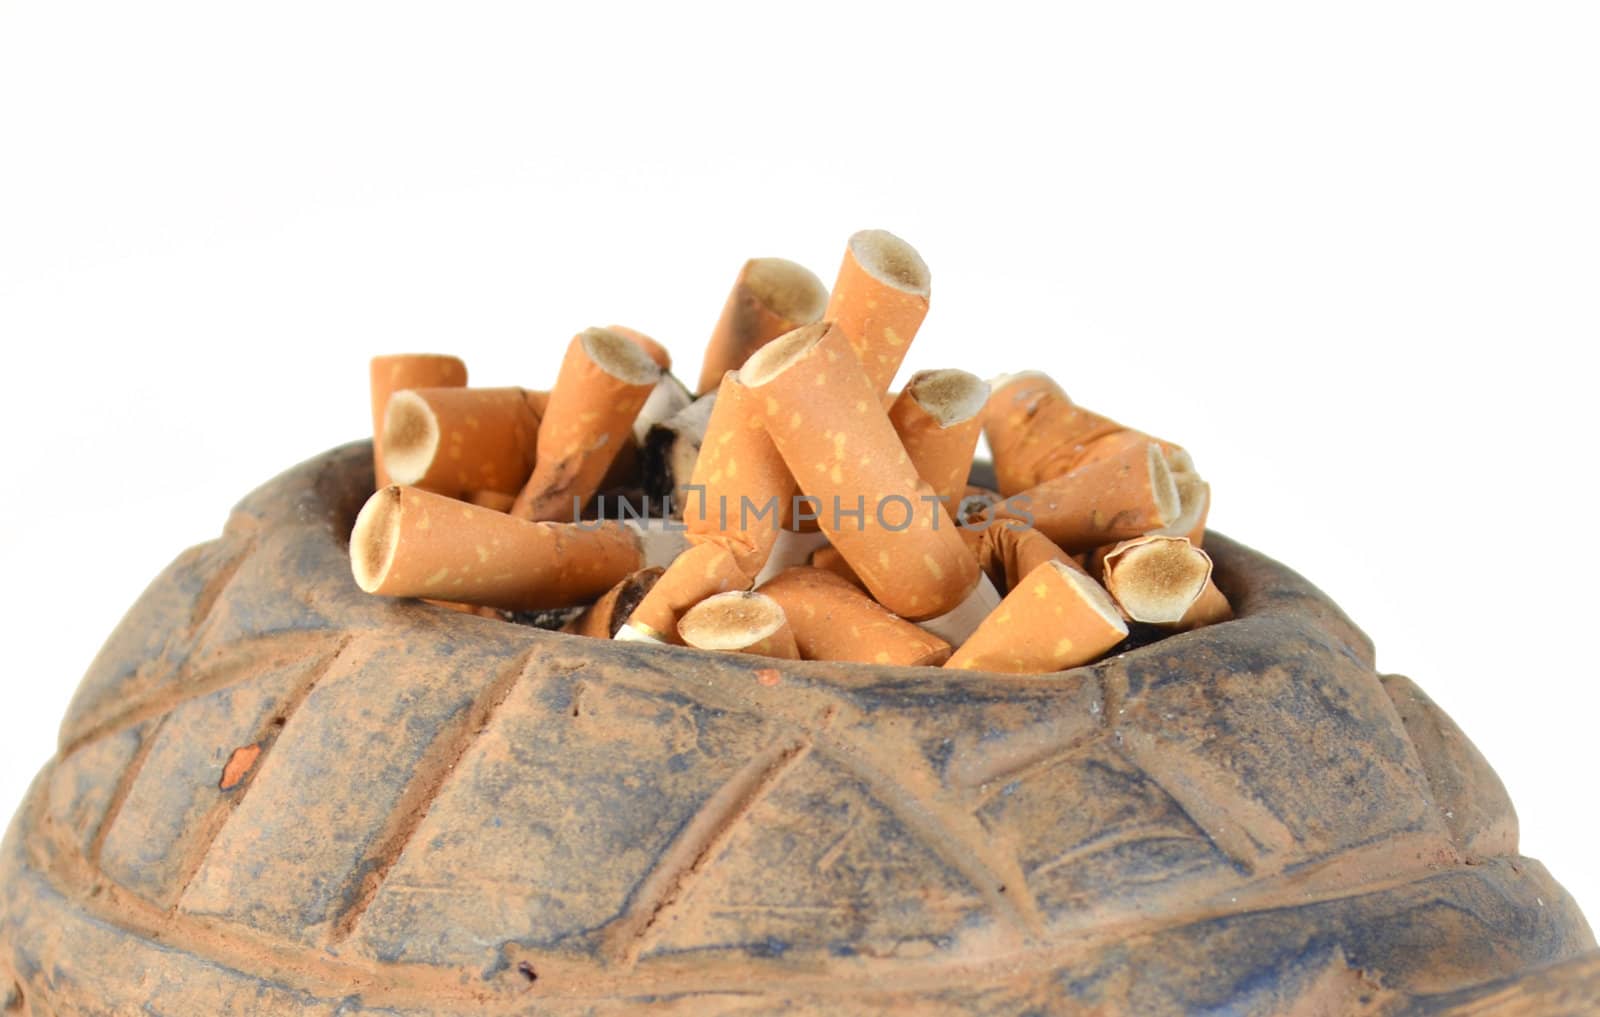 Cigarette butts in ashtray on white background